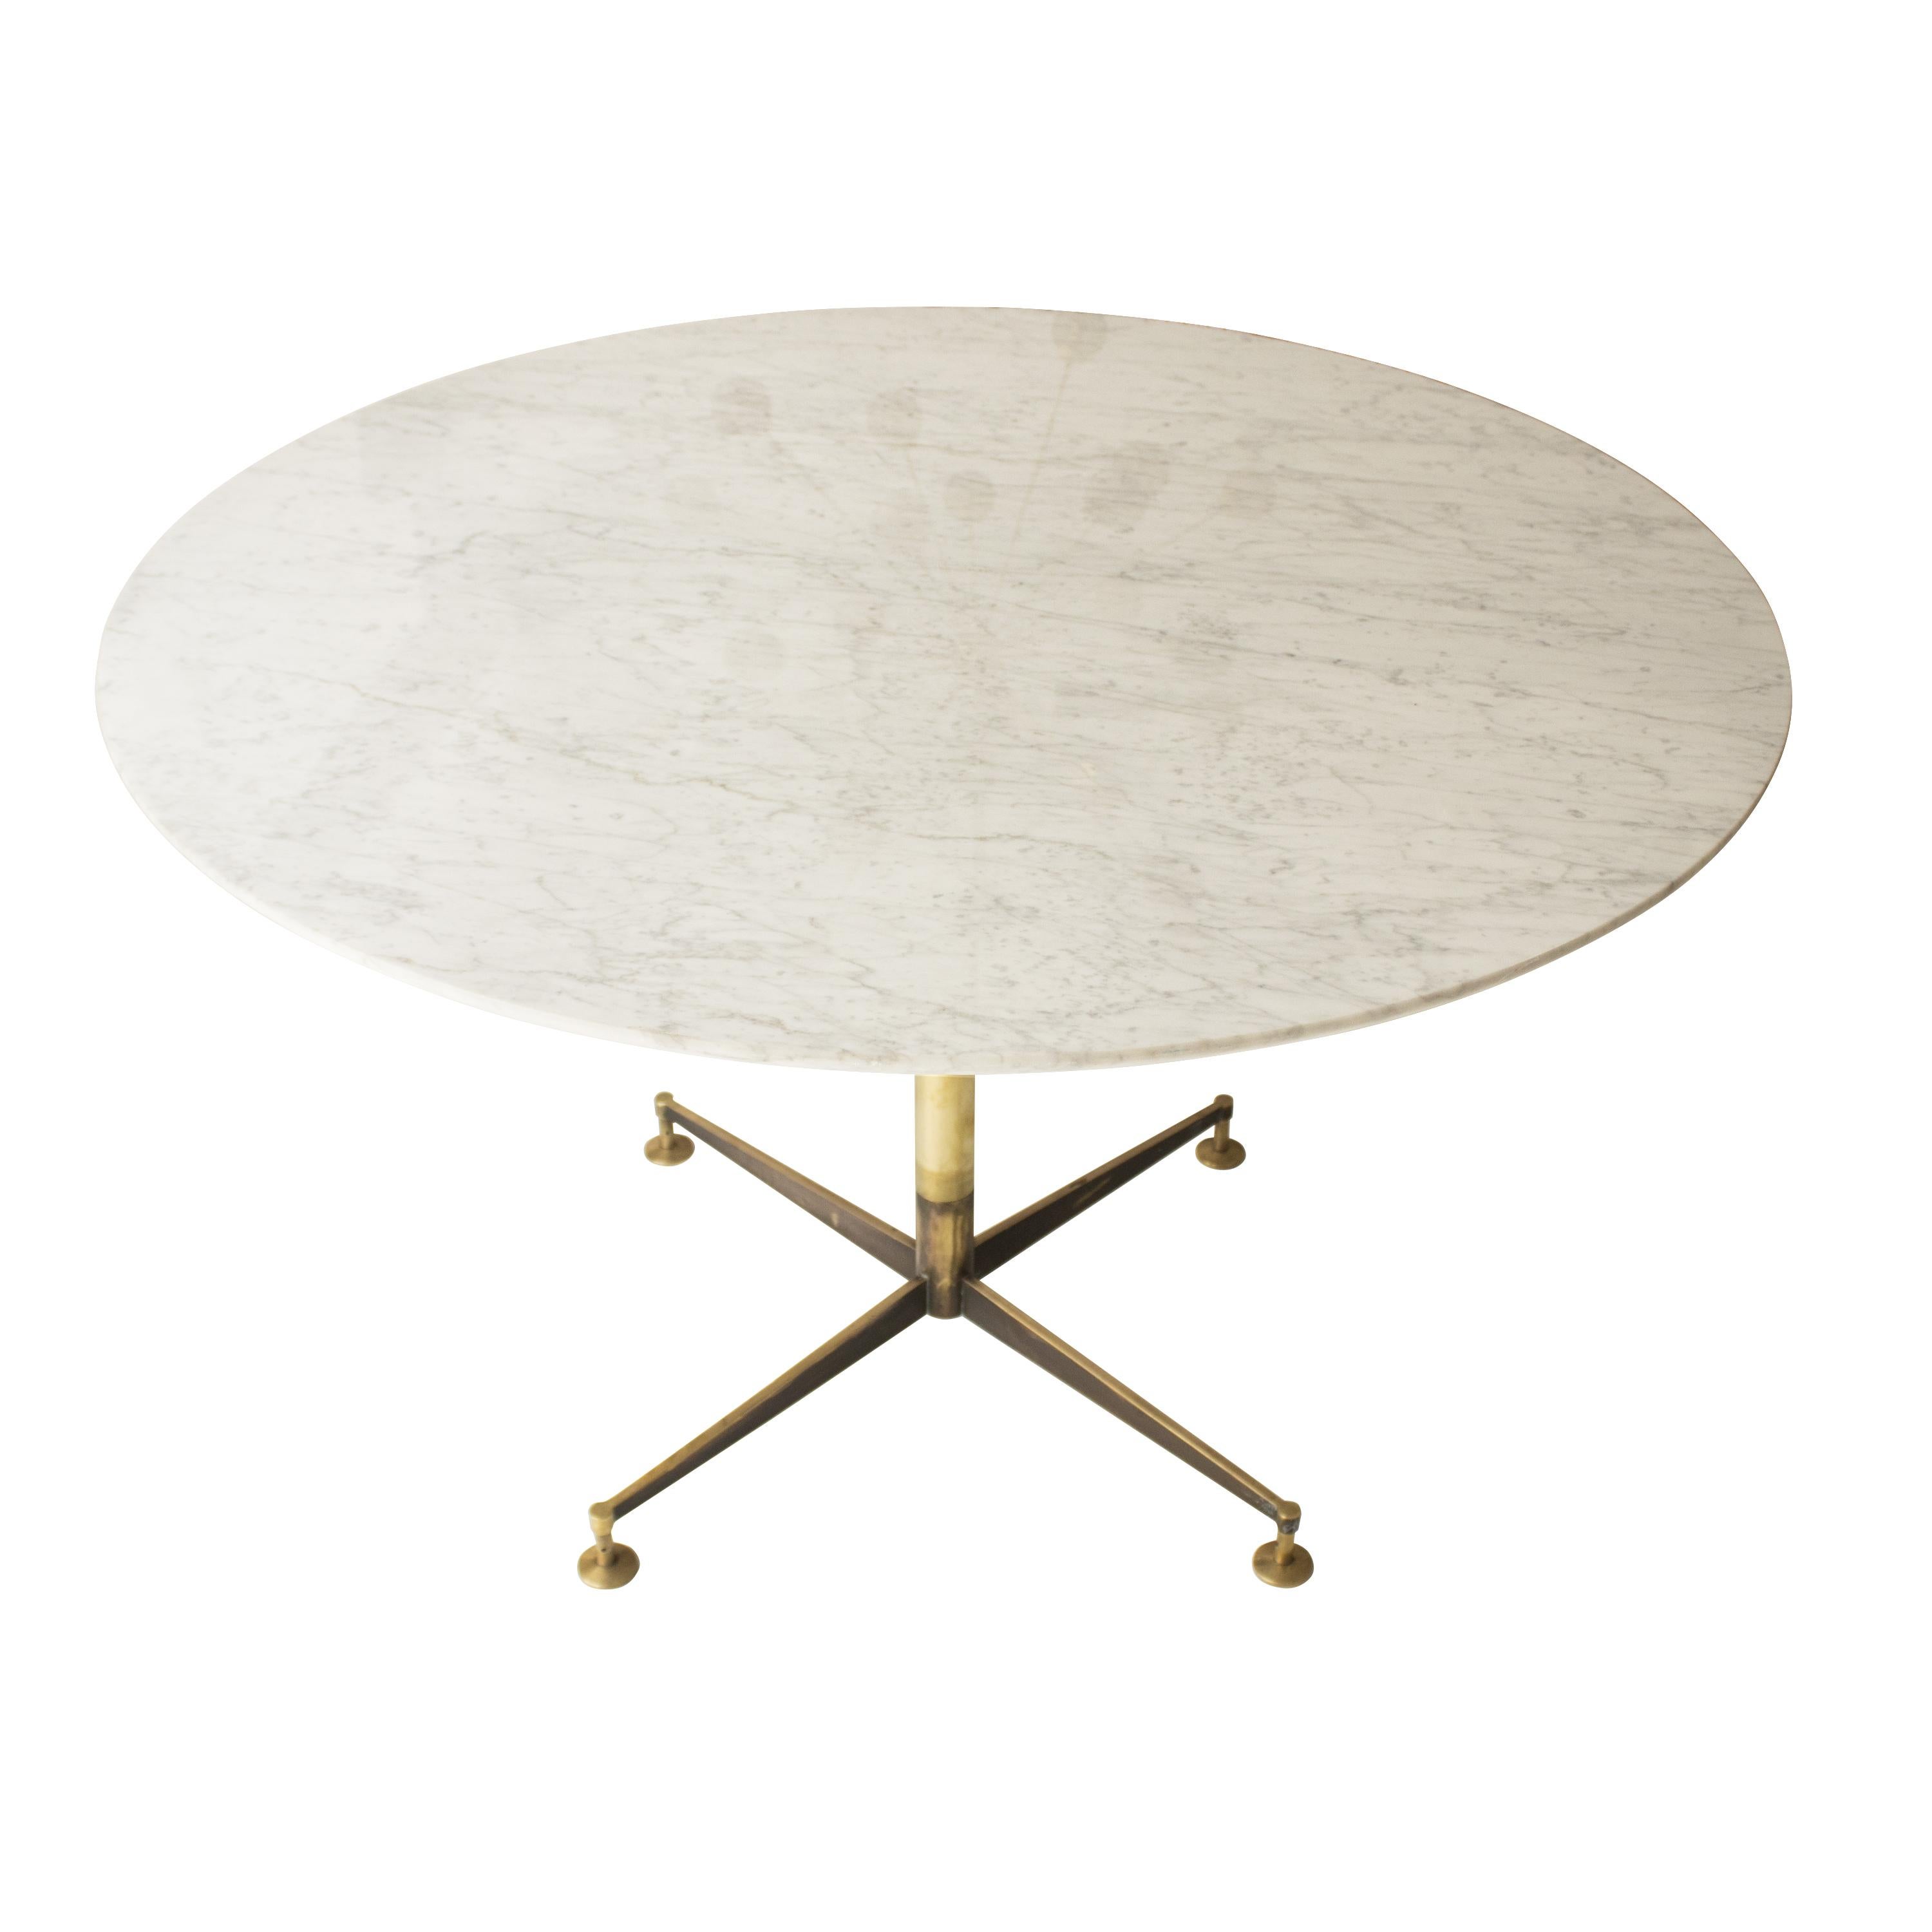 Italian Mid-Century Modern marble table from the 1950s.
The table is made up of a central brass foot with 4 legs, and leveling pads finished in aged brass.
The 2 cm thick round Carrara marble top with a flute peak edge finish rests on said